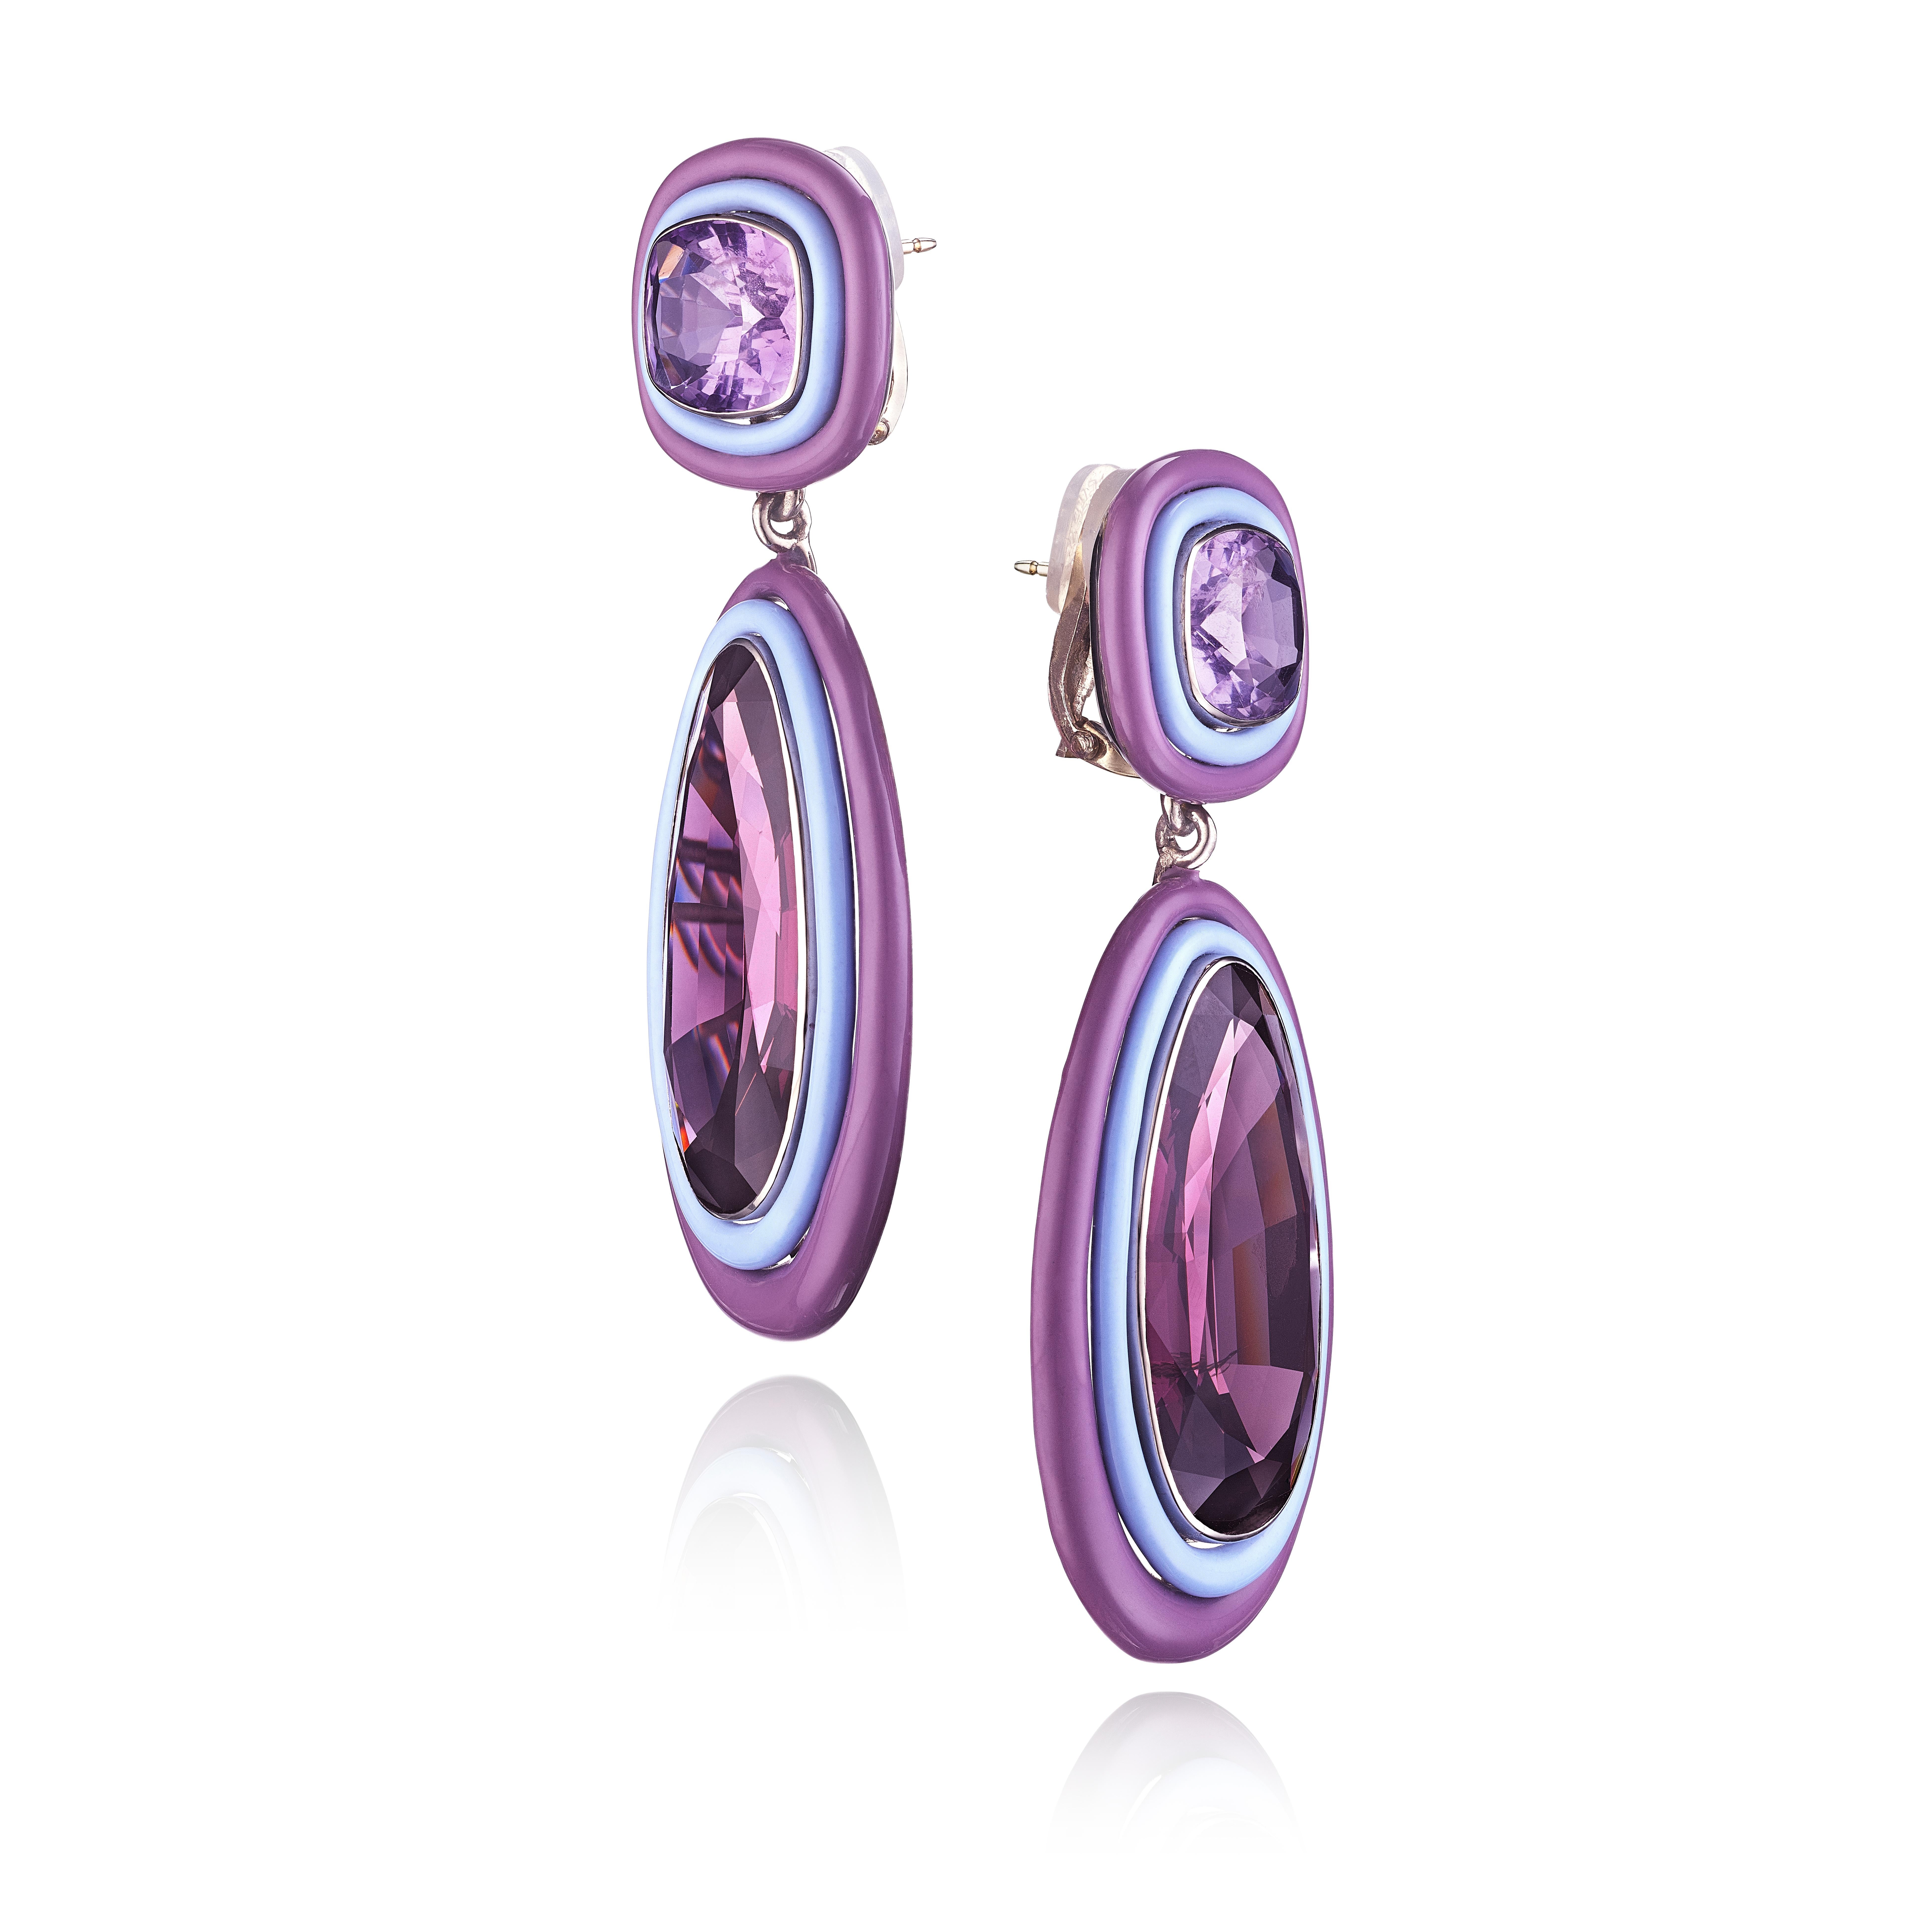 A pair of ear clips, each featuring a pear-shaped spinel framed in varying shades of purple-colored ceramic, suspended from a similarly framed cushion-shape amethyst; mounted in white gold
• 2 pear-shaped spinels, weighing 36.72 and 35.80 carats
• 2